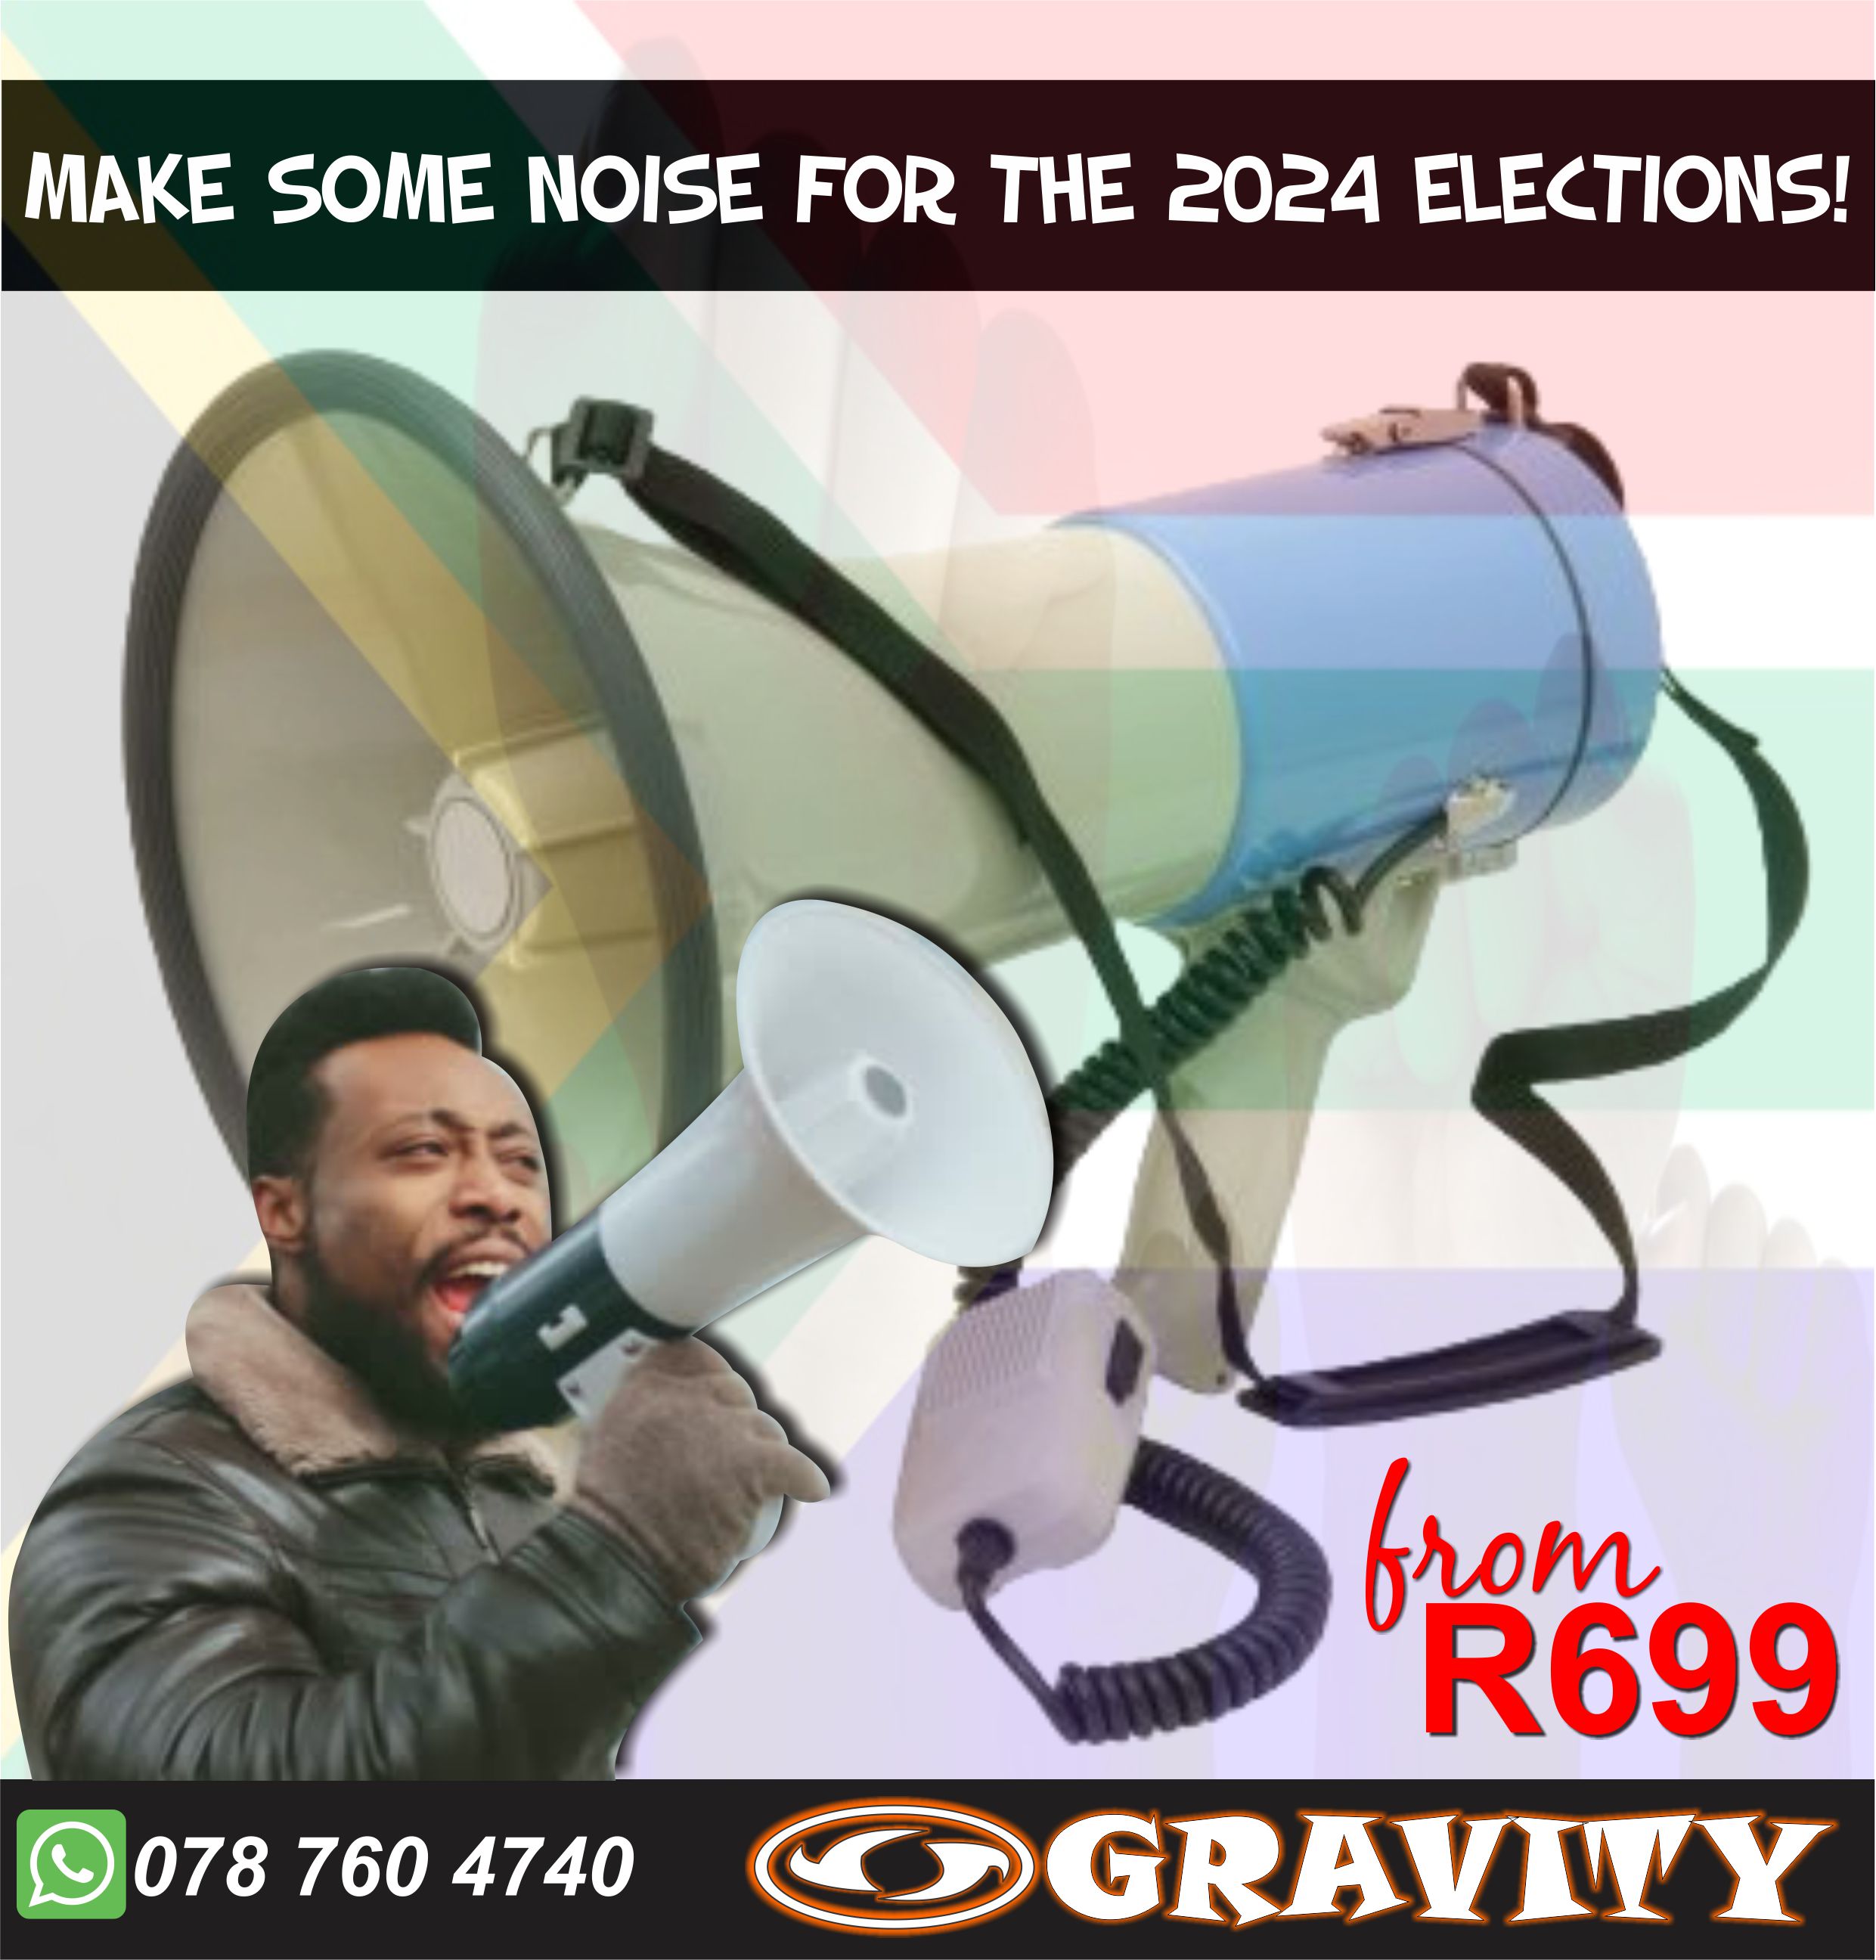 durban gravity Megaphone Loudhailer Mic Speaker PUBLIC ADDRESS BROADCASTING SYSTEMS DURBAN elections megaphone loudhailer | deal megphones mic system for all your outdoor events like rallys, marches, political rallys and announcements Political Elections outdoor announcements available at gravity dj store 0315072736  0315072463  . Megaphone Loudspeaker ANC elections outdoor events announcements 0315072463  DA political elections megaphone mic speaker needed at gravity dj store 0315072463  -with handheld mic OR without  -battery operated  -12v car power compatible  -Different sizes available:    * 5w / 15w  25w / 40w  loudspeaker horn loud hailer megaphone...`CALL STORE FOR AVAILABILITY  -sling strap carry about loudspeaker   -portable loudspeaker megaphone  -outdoor handheld mobile loudspeaker  Megaphones, loudhailers, and pa amplifiers used in public hearings, schools and elections a system of microphones, amplifiers, and loudspeakers used to amplify speech or music in a large building or at an outdoor gathering.This article is about audio systems. For public IP addresses, see IP address.Durable sound for events, evacuation, meetings and political rallies. Professional advice is free and is a phone call away Megaphone  From Wikipedia, the free encyclopedia This article is about the amplification device. For the chemical compound, see Megaphone (molecule). For other uses, see Megaphone (disambiguation). 